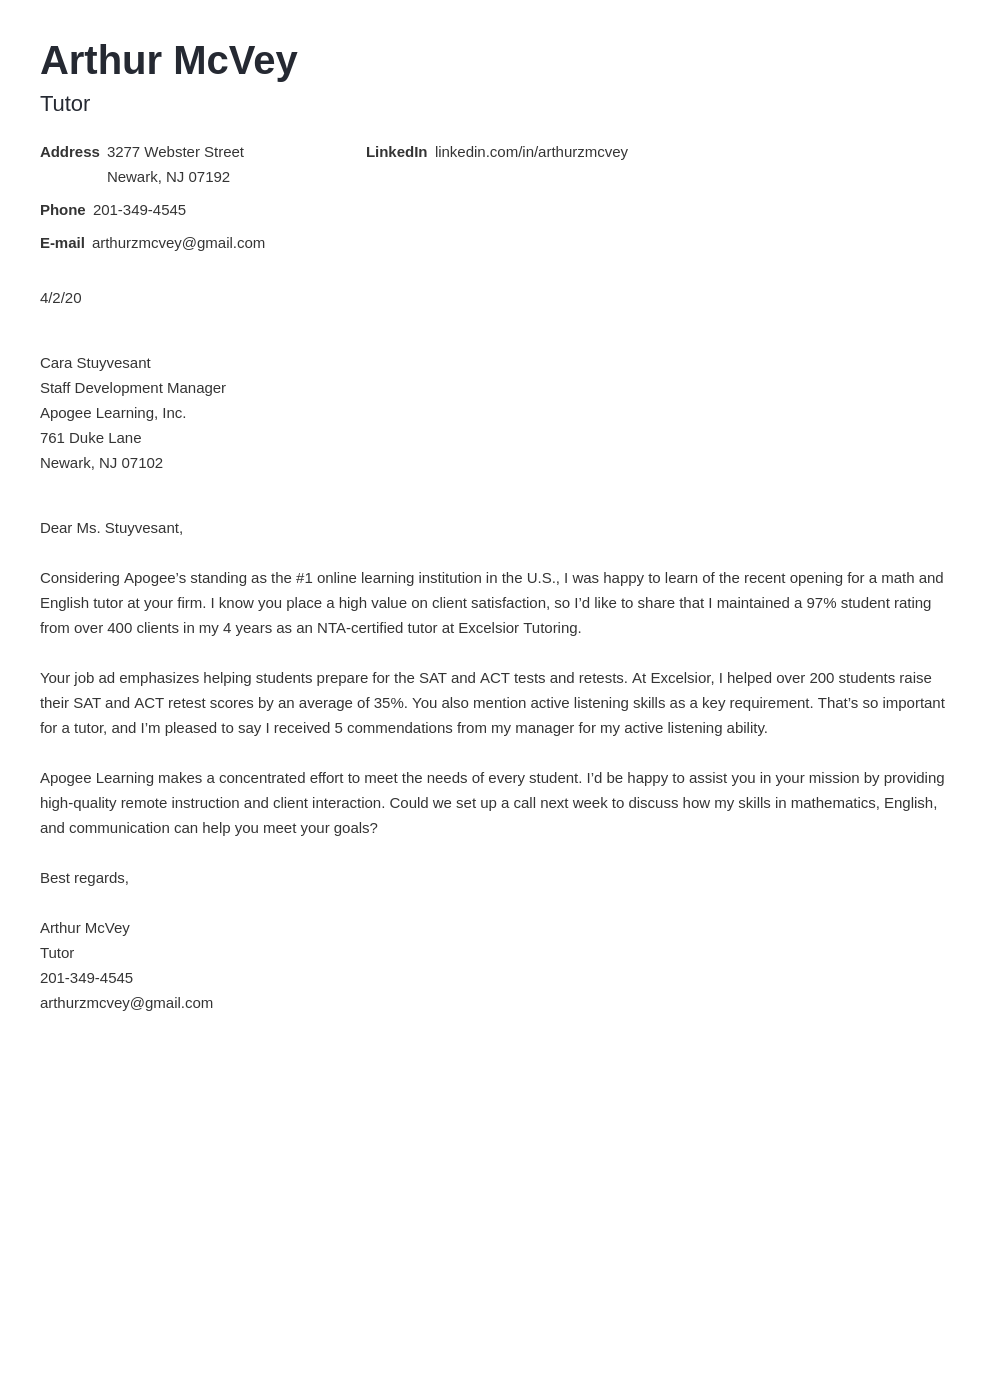 How to Write a Formal Cover Letter: Examples, Format & Guide